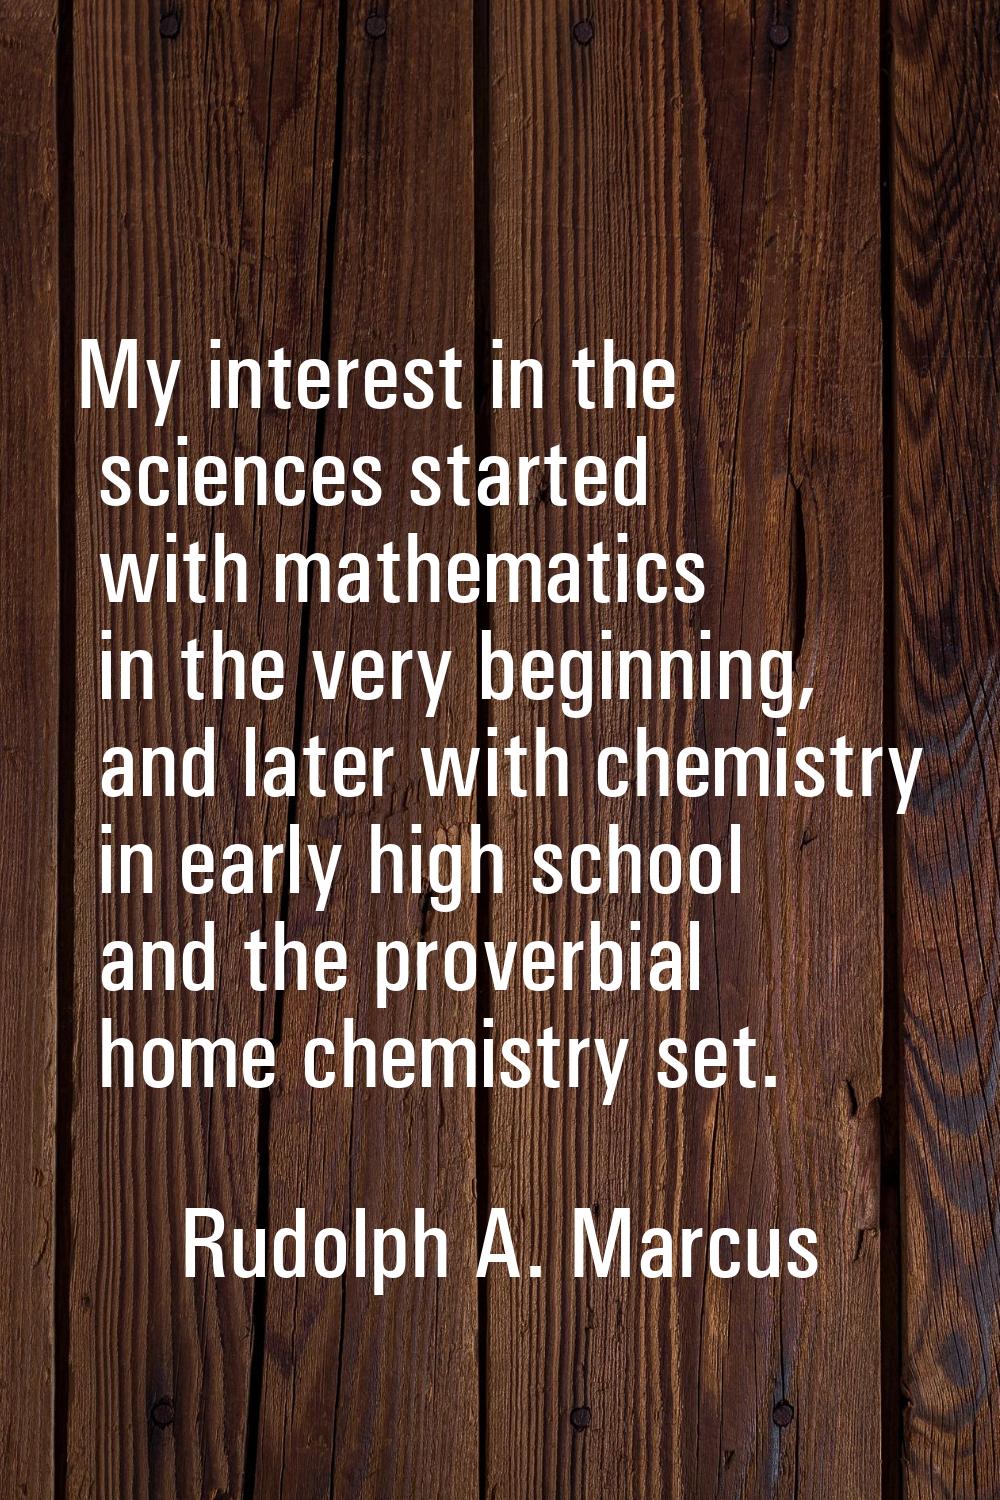 My interest in the sciences started with mathematics in the very beginning, and later with chemistr